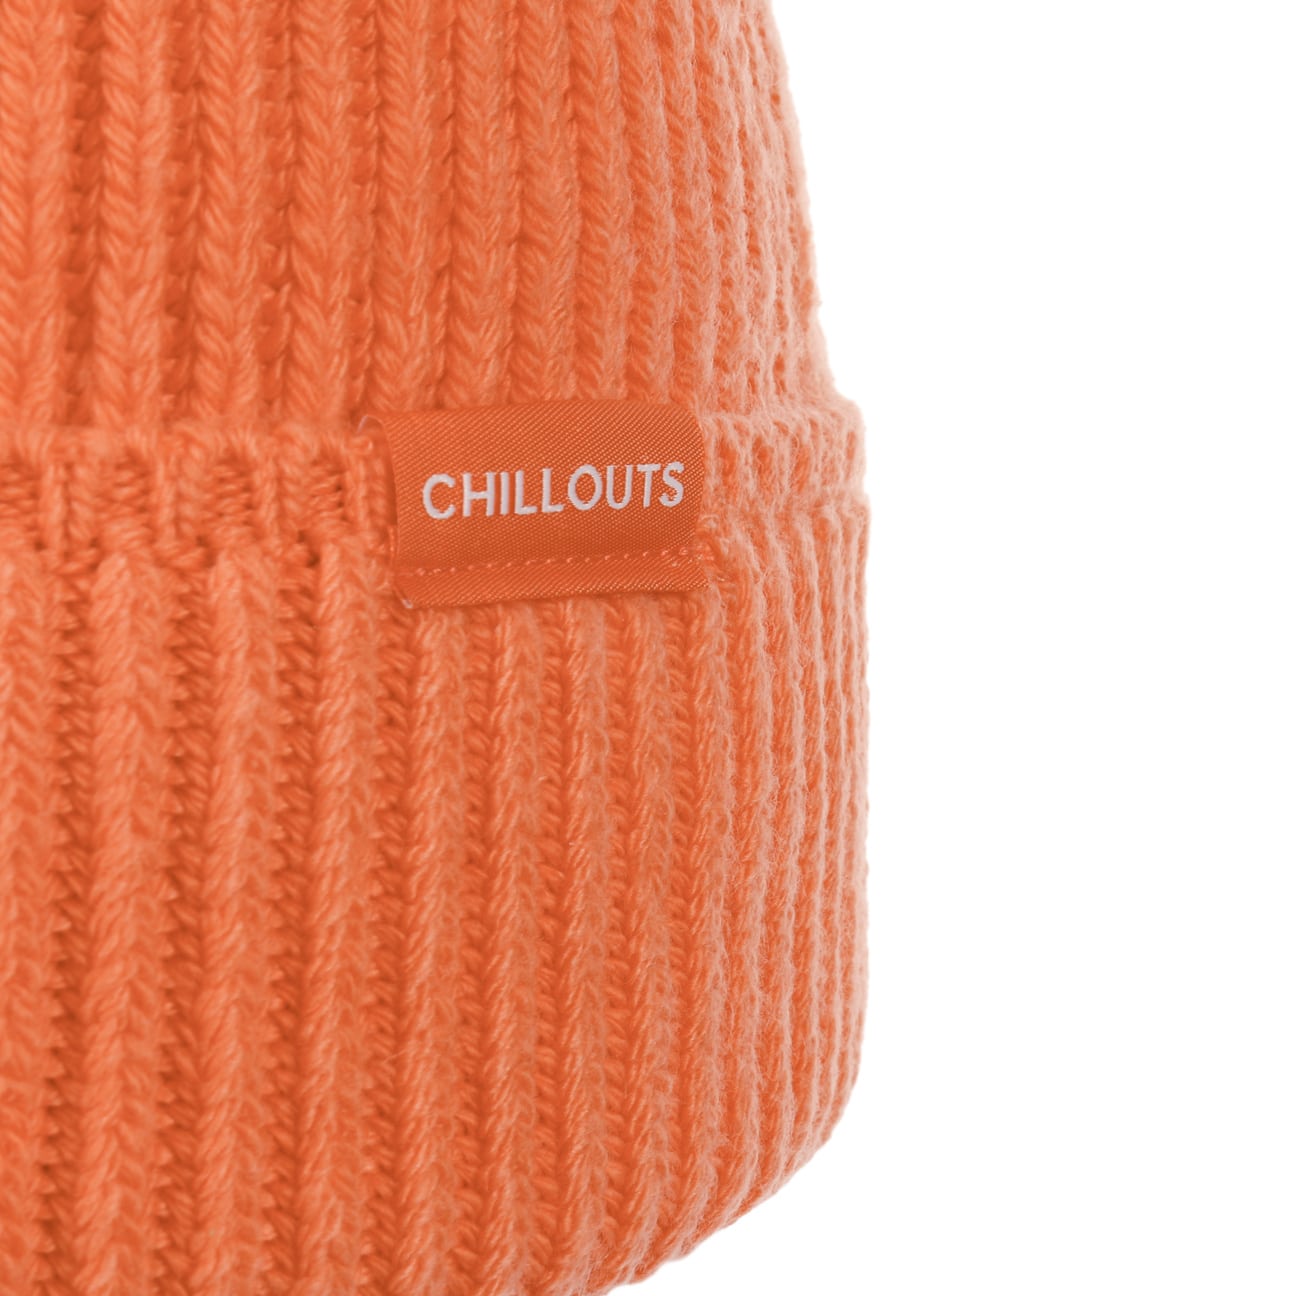 Cotton by 29,99 Wool - Meets Umschlagmütze € Chillouts